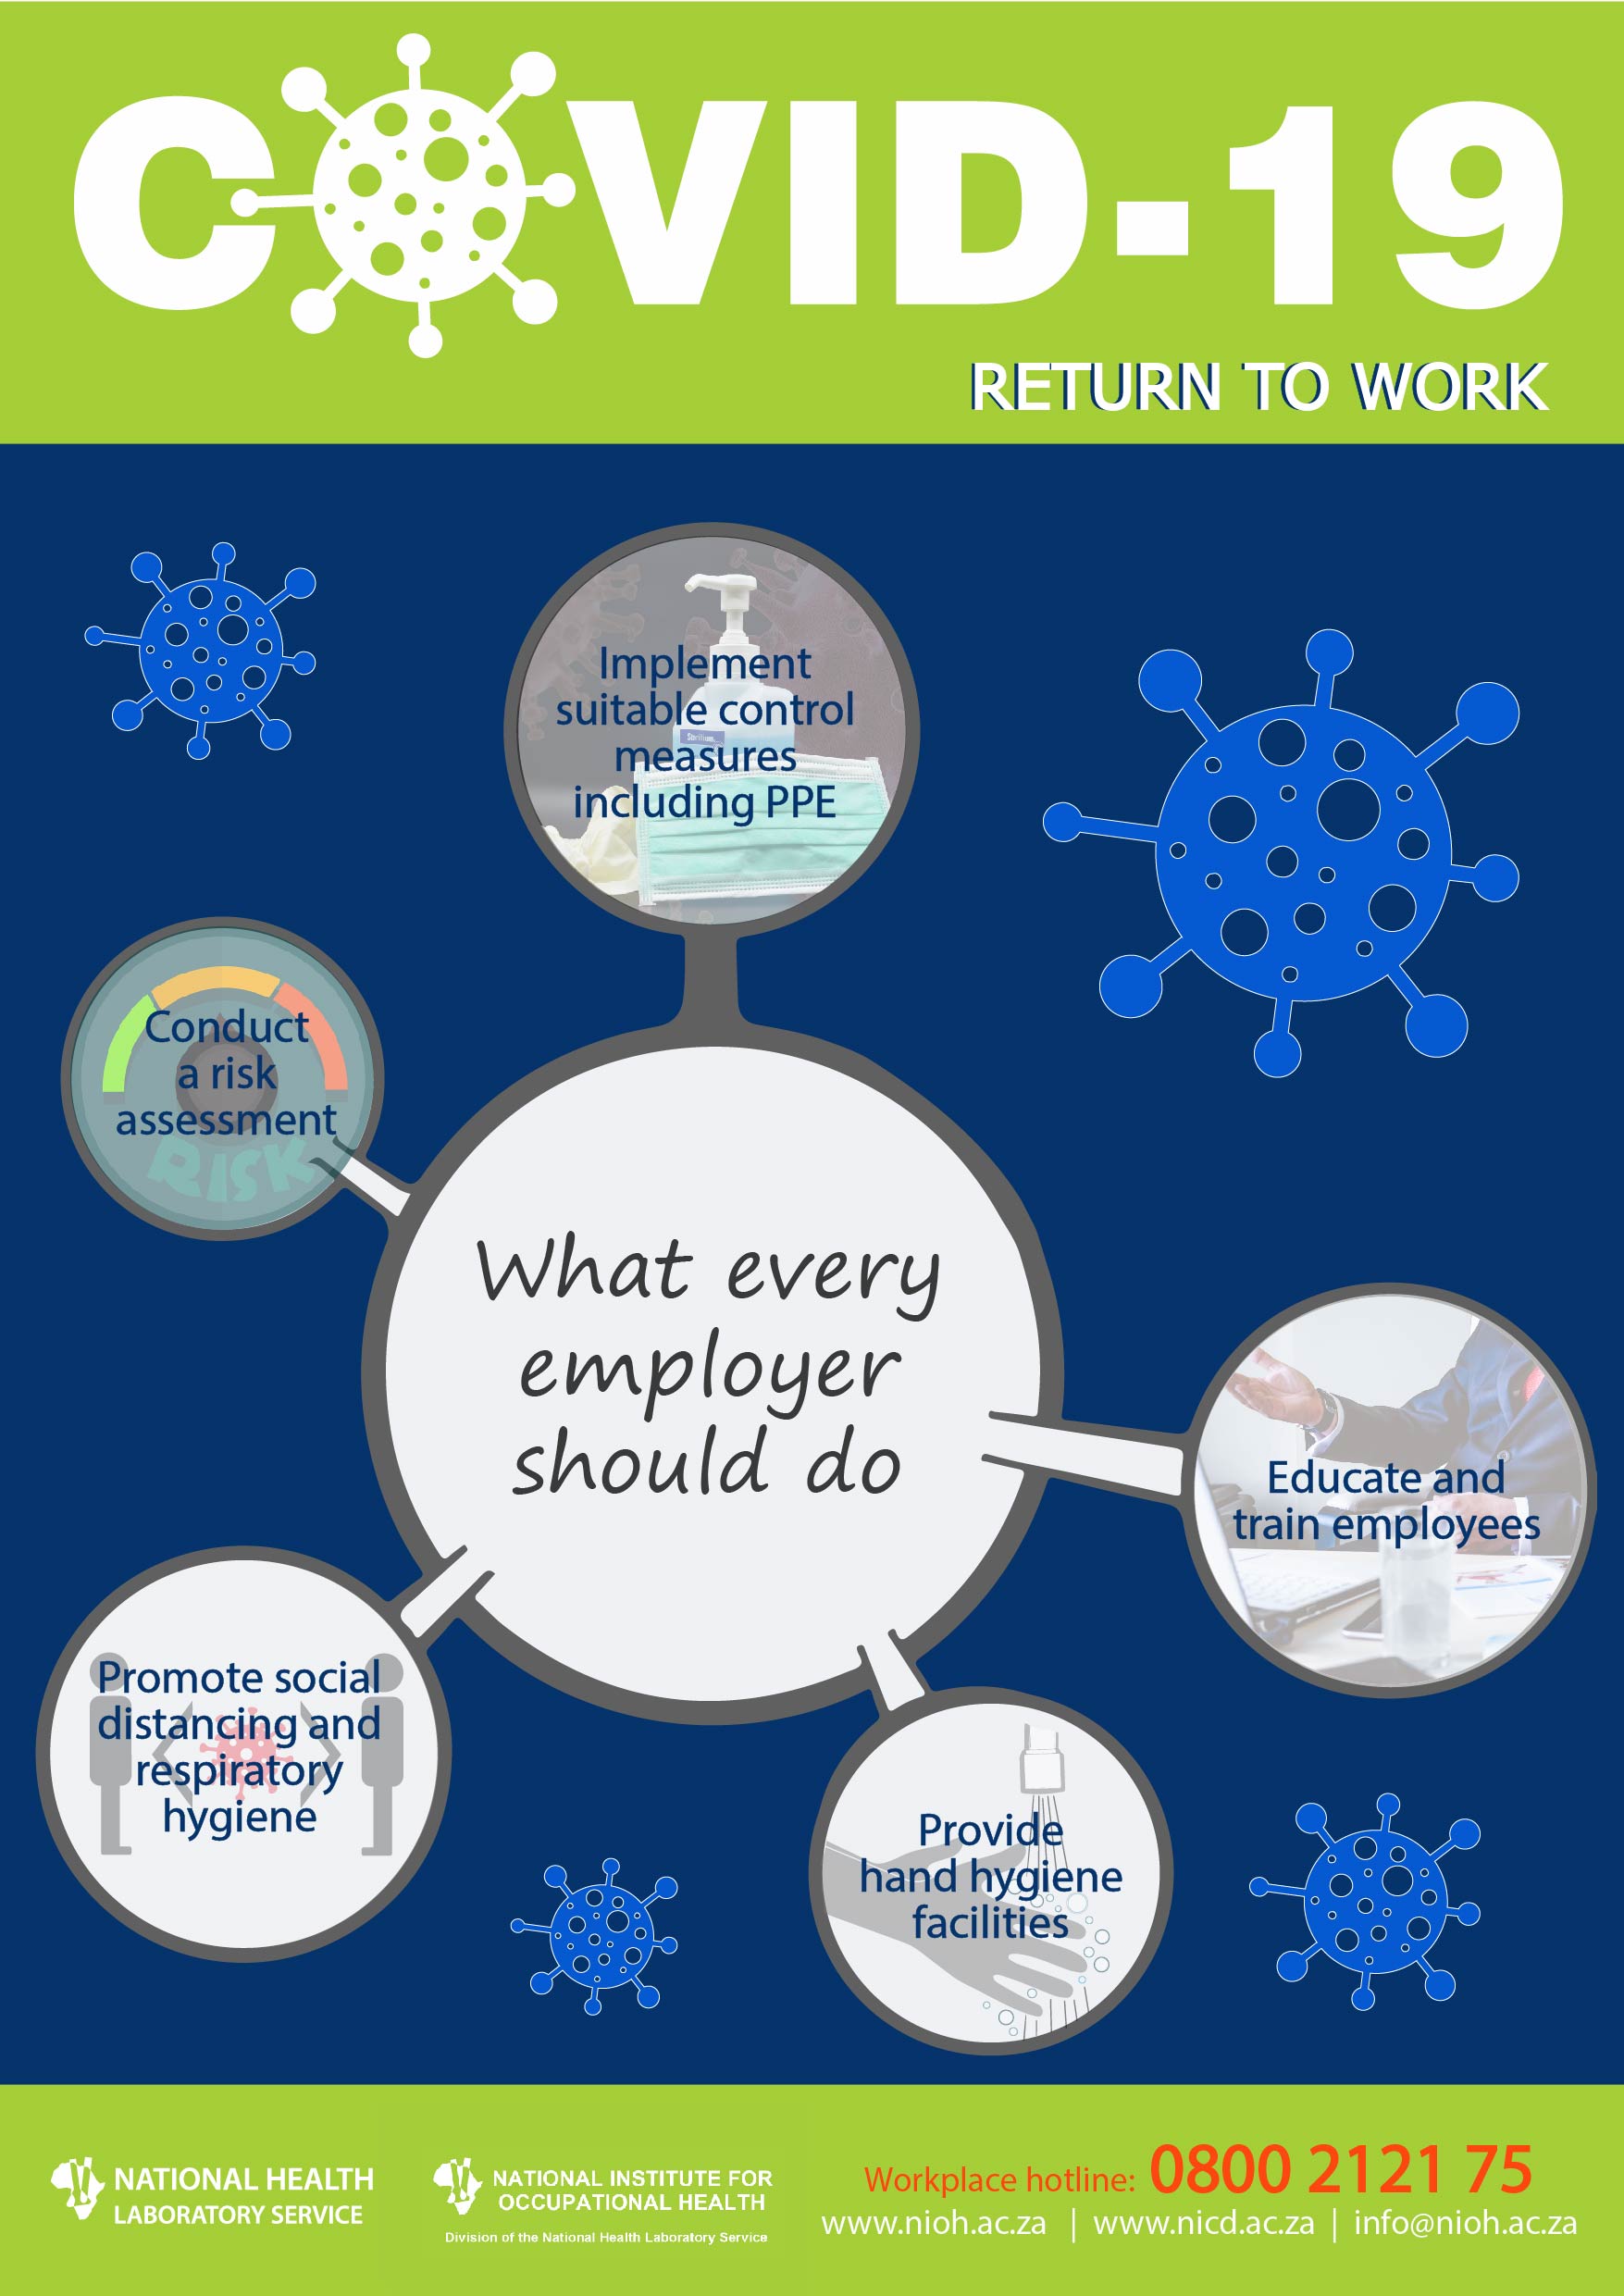 Return to Work - What every employer should do